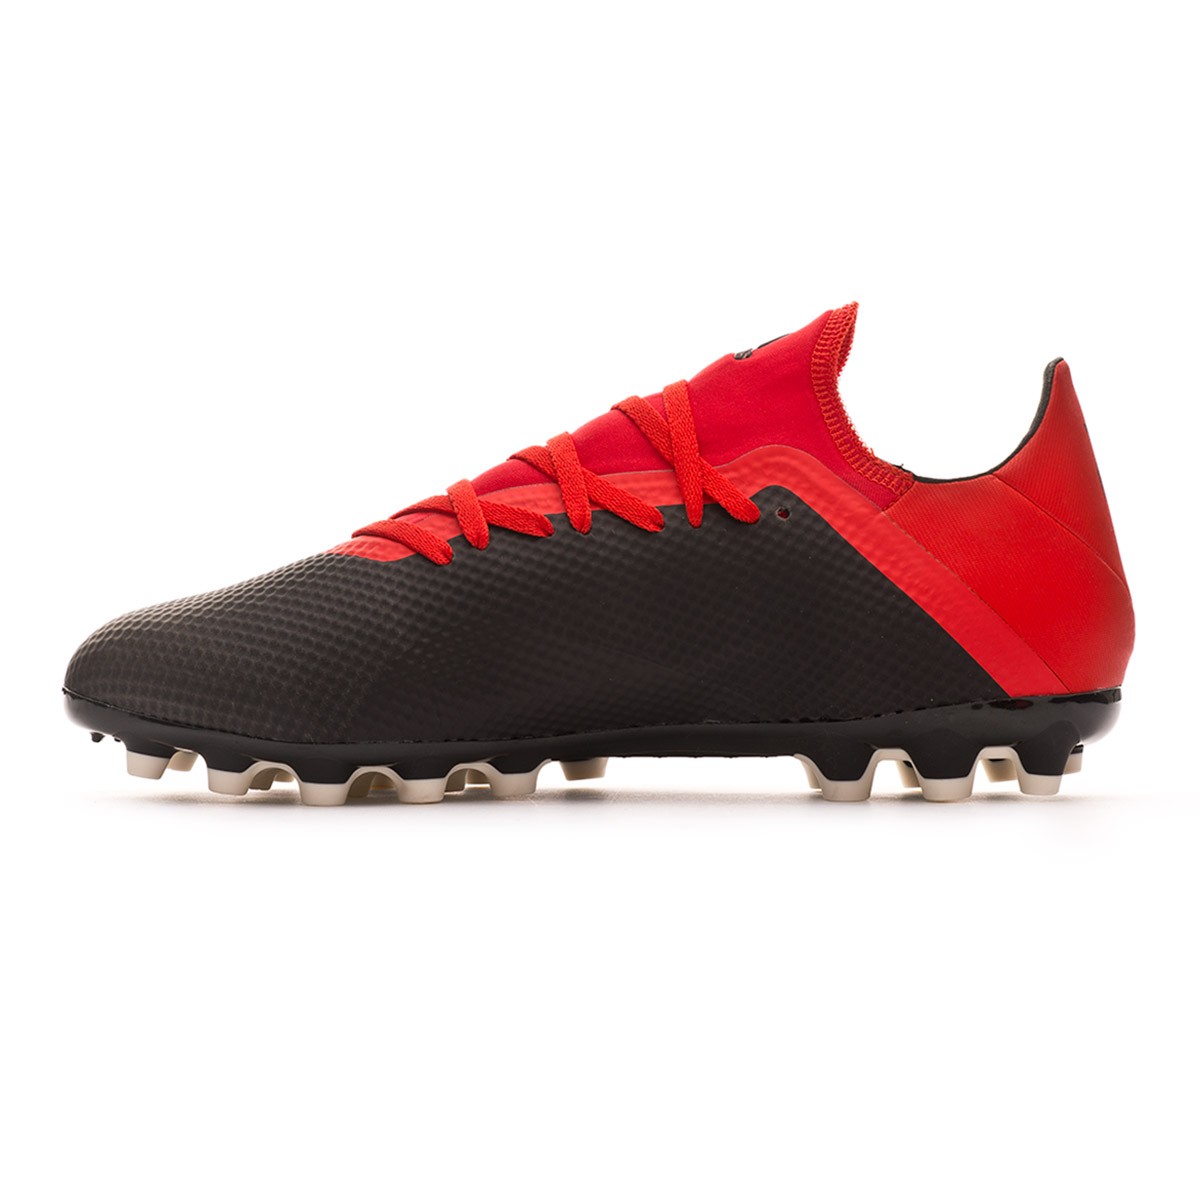 adidas x 18.3 red and black